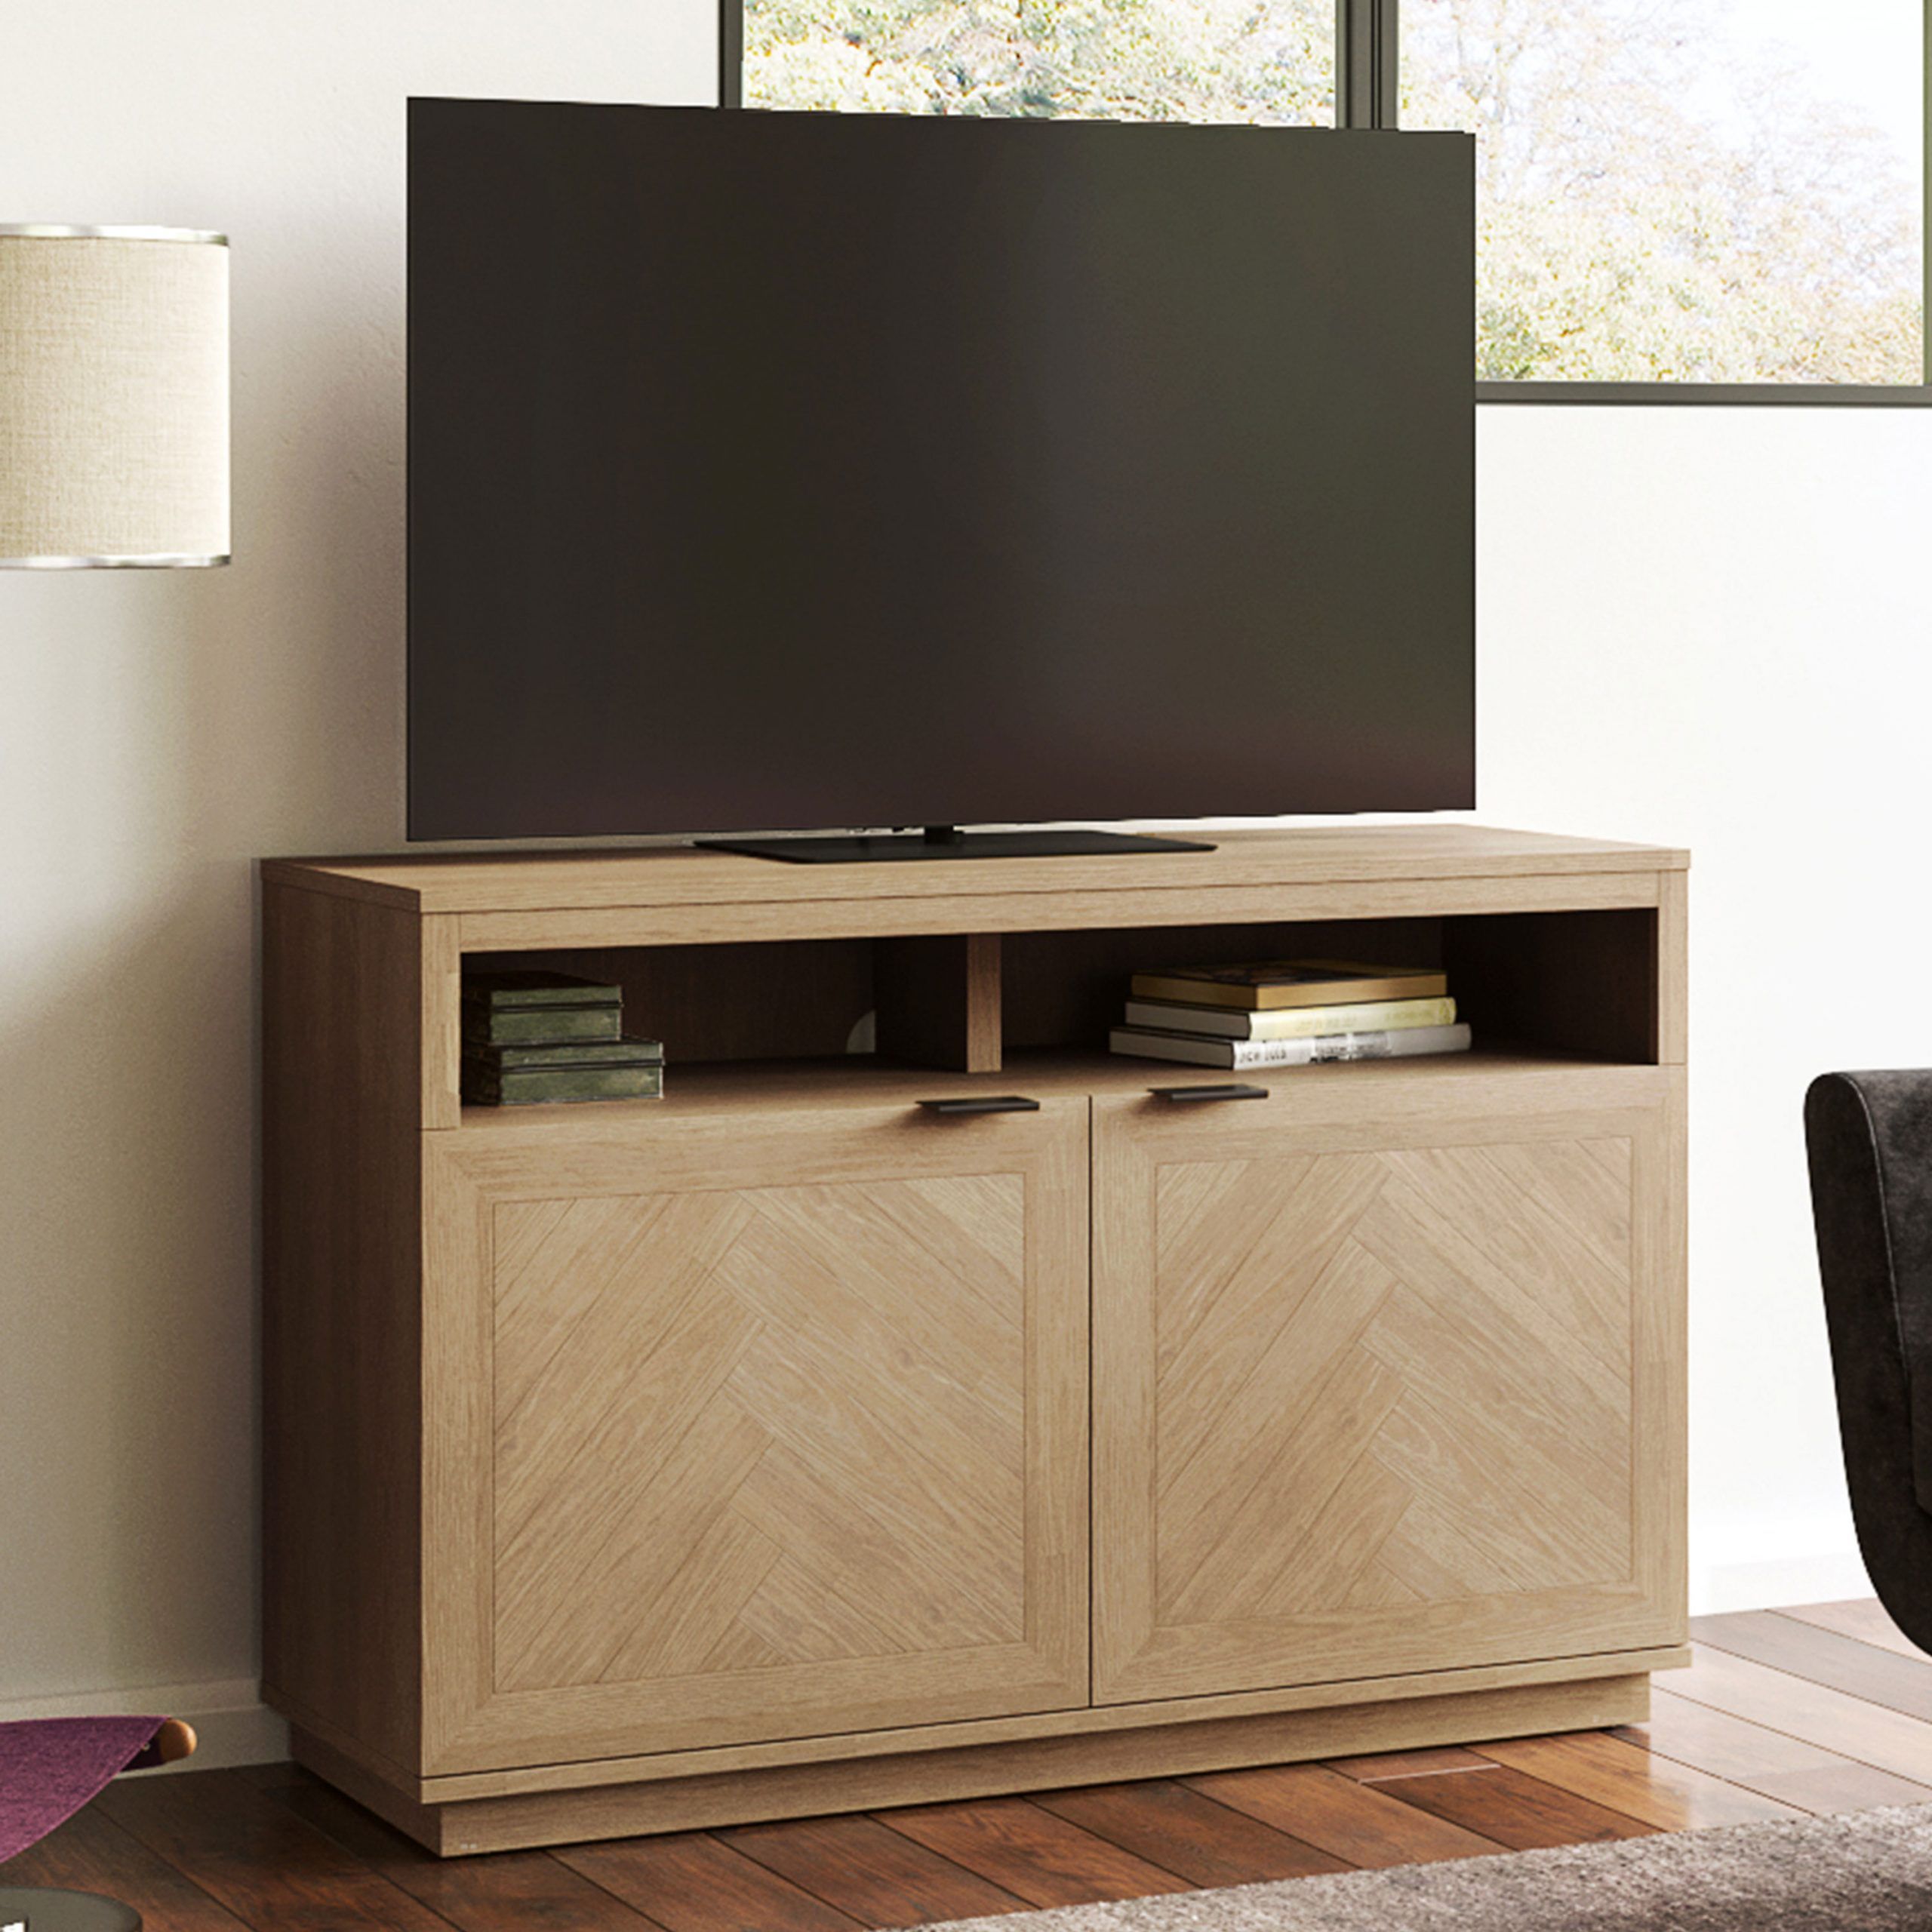 Better Homes & Gardens Hendrix Herringbone Style Tv Stand Regarding Twila Tv Stands For Tvs Up To 55" (View 9 of 15)